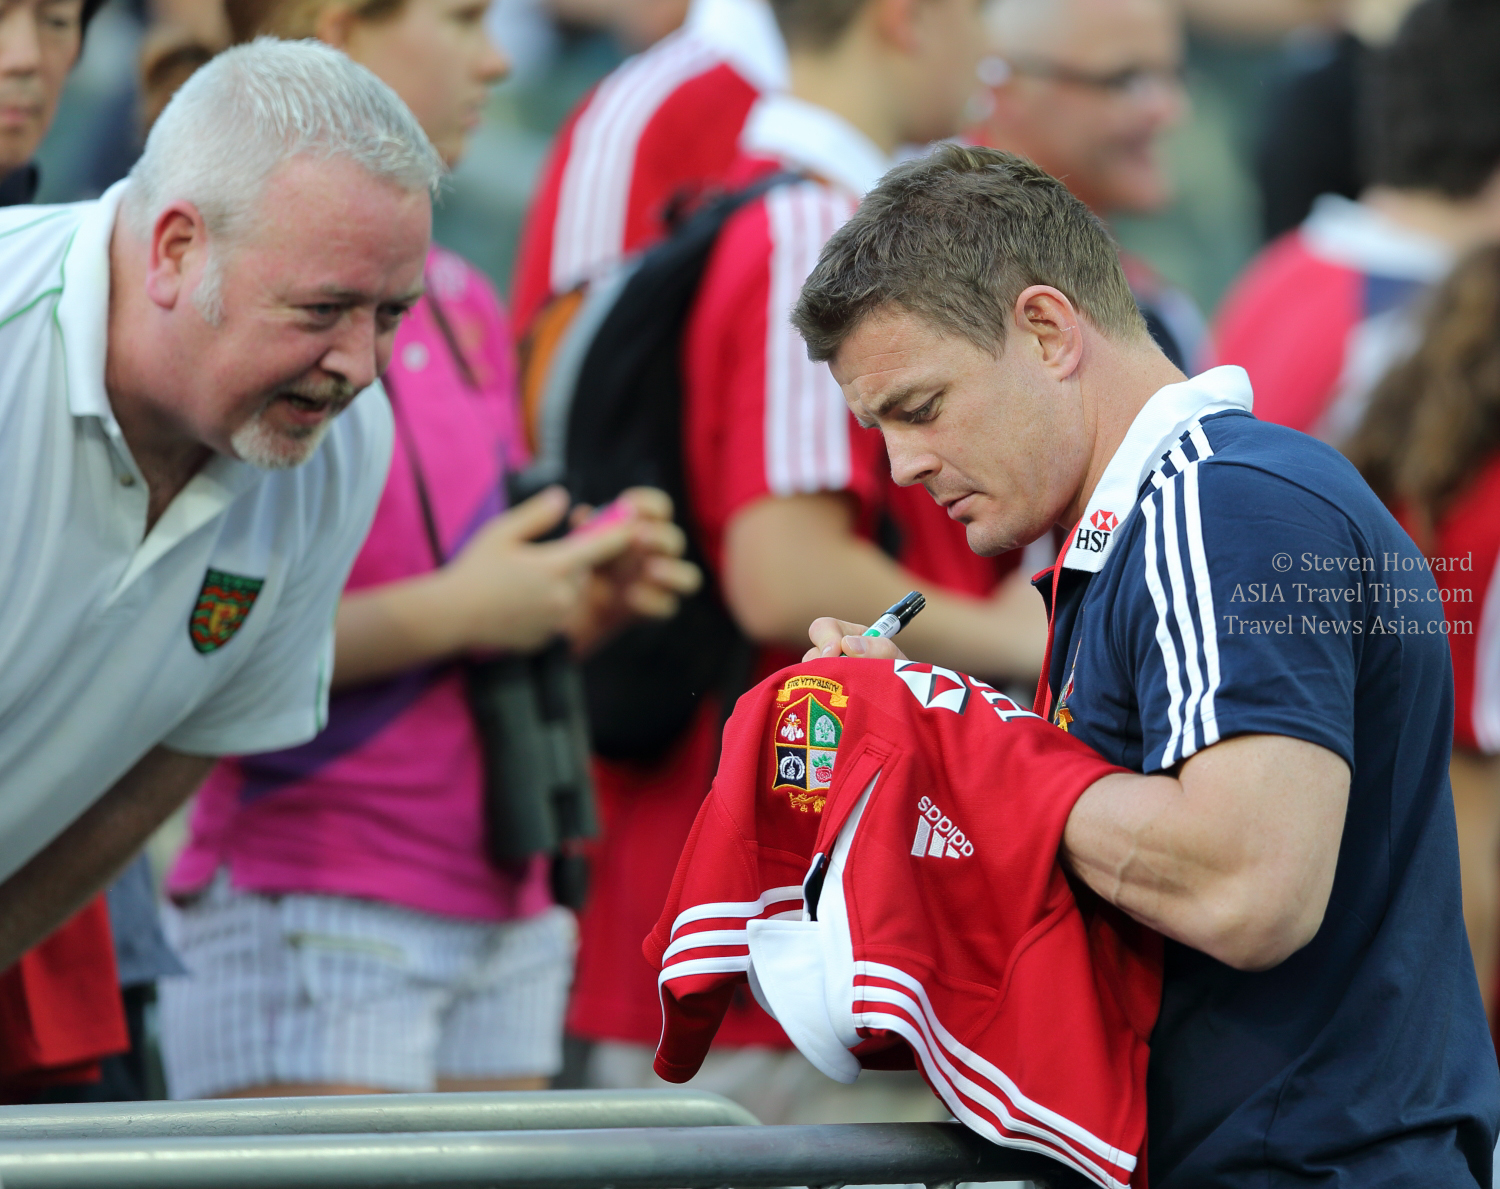 Brian O'Driscoll, one of the most highly respected and famous rugby players in the world, signing a shirt for a British & Irish Lions fan in Hong Kong in 2013. Picture by Steven Howard of TravelNewsAsia.com Click to enlarge.